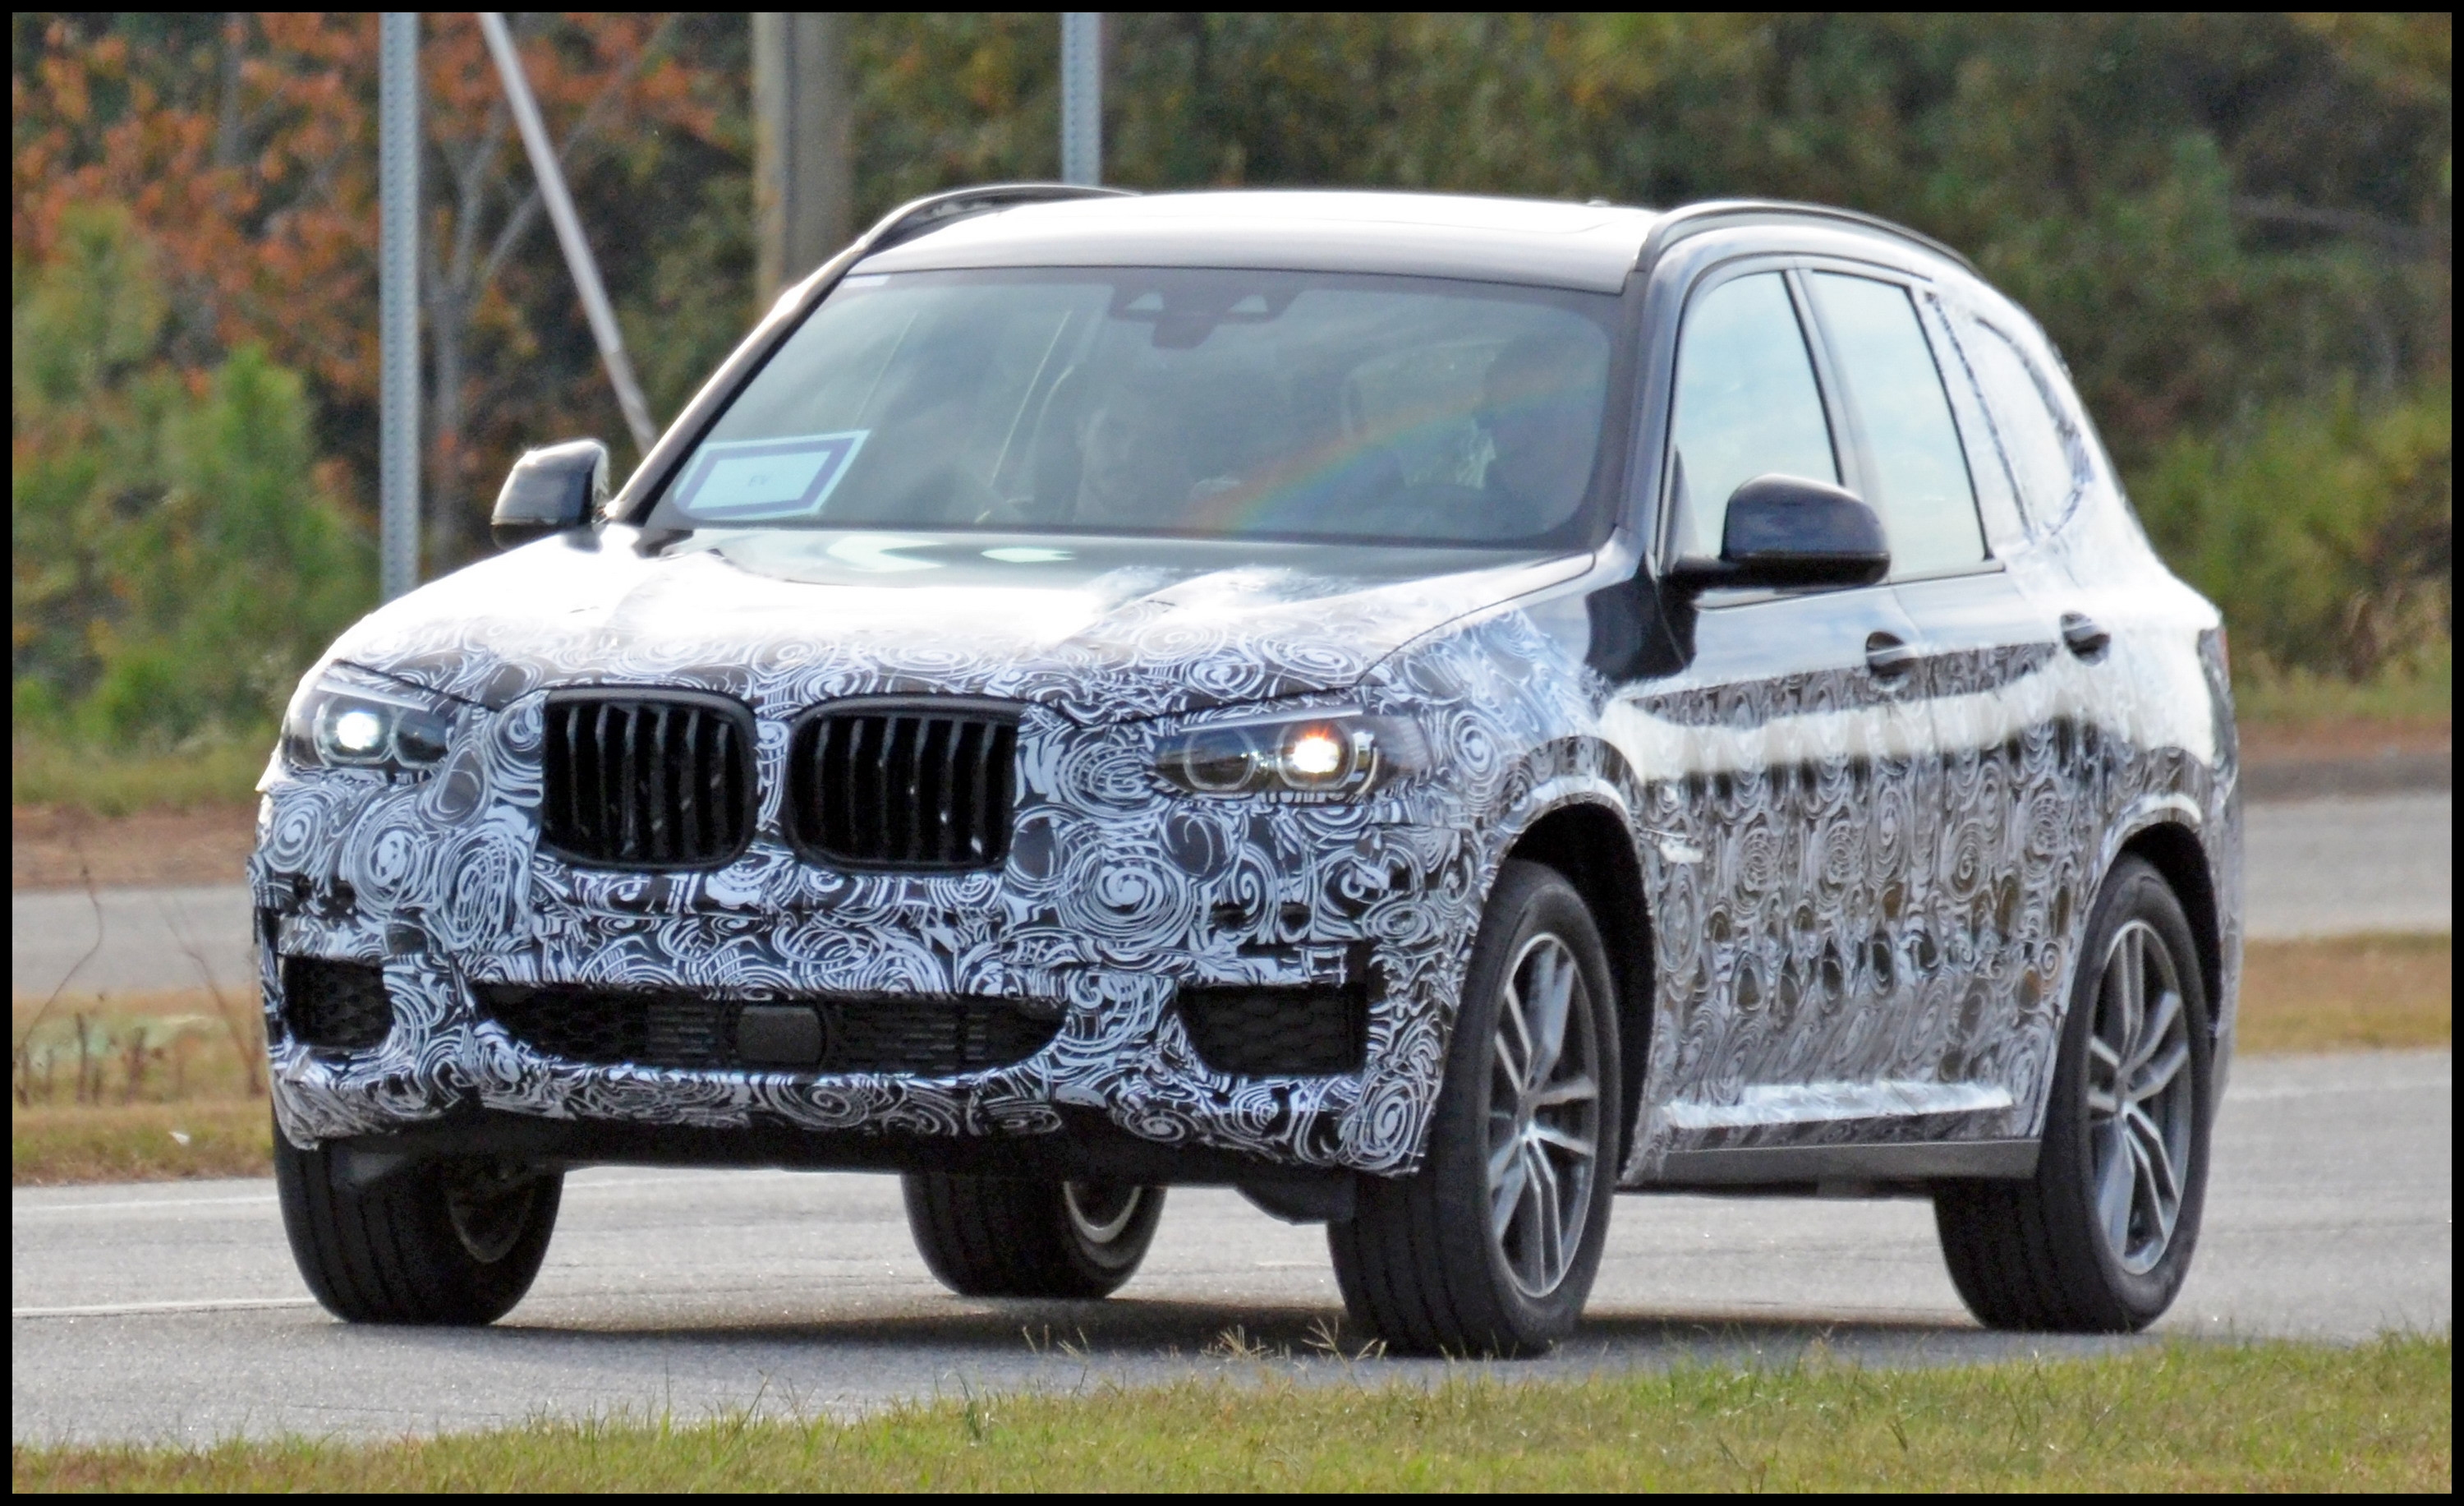 Difference Between Bmw X1 and X3 Inspirational 2018 Bmw X3 Difference Between Bmw X1 and